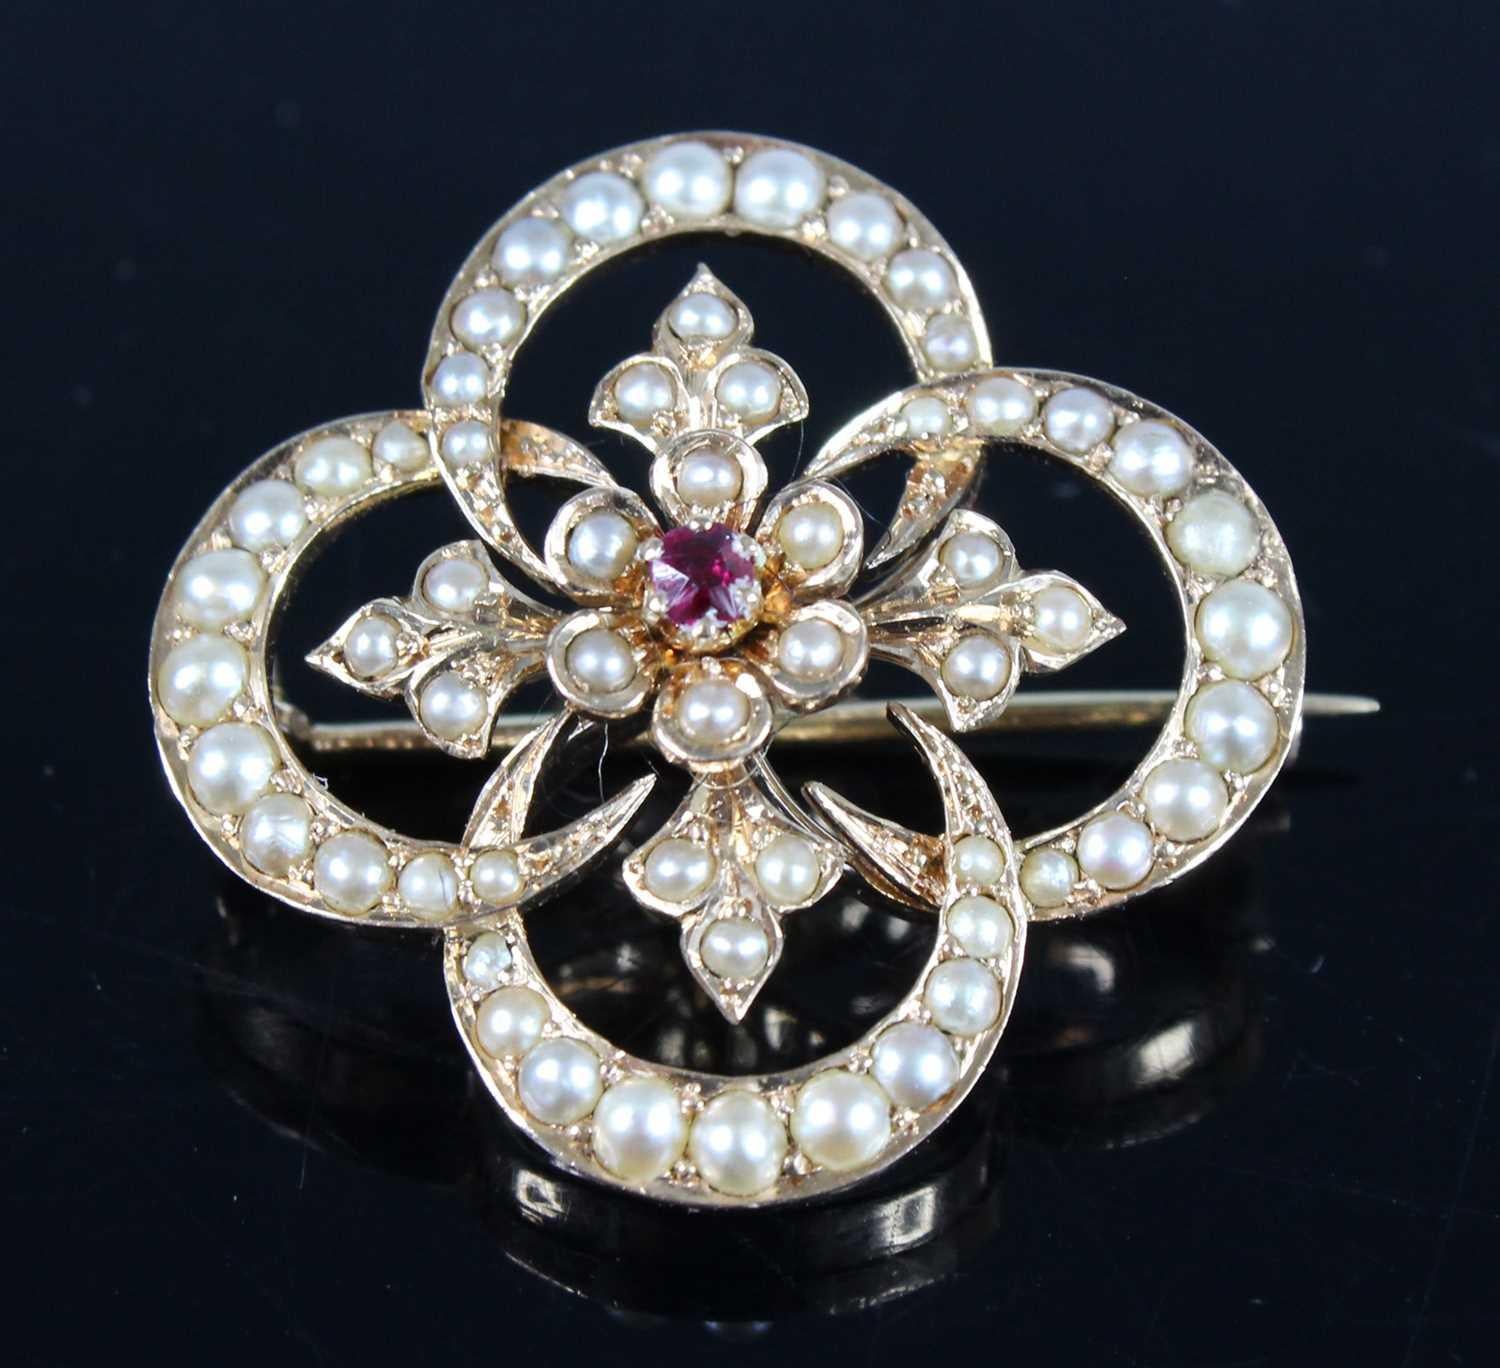 Elegant 14K Gold Ruby and Seed Pearl Crescent Floral Brooch with Fleur-de-Lis Inlaid Design

This exquisite brooch probably dates back to circa 1900 or later and is a testament to craftsmanship. Crafted in solid 14K yellow gold, the brooch weighs